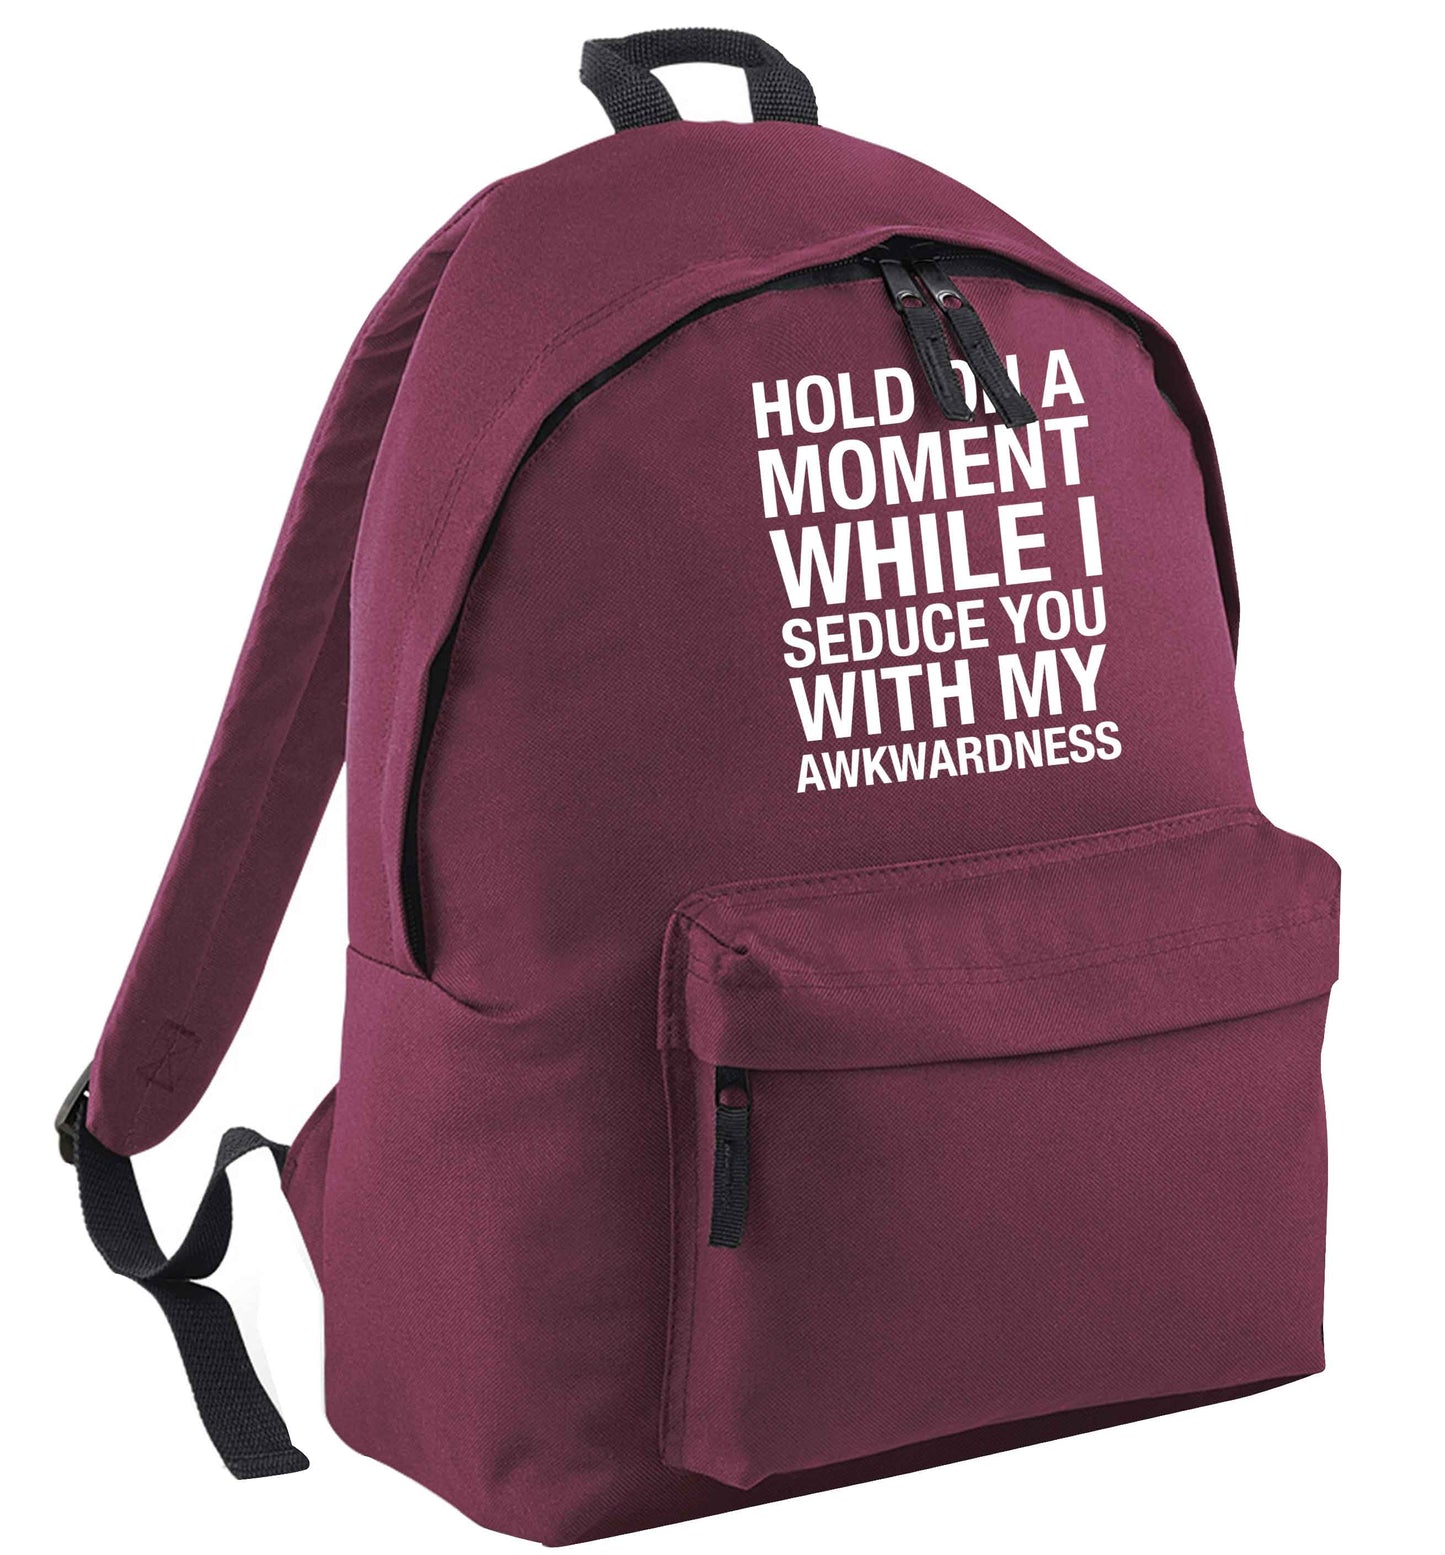 Hold on a moment while I seduce you with my awkwardness maroon adults backpack